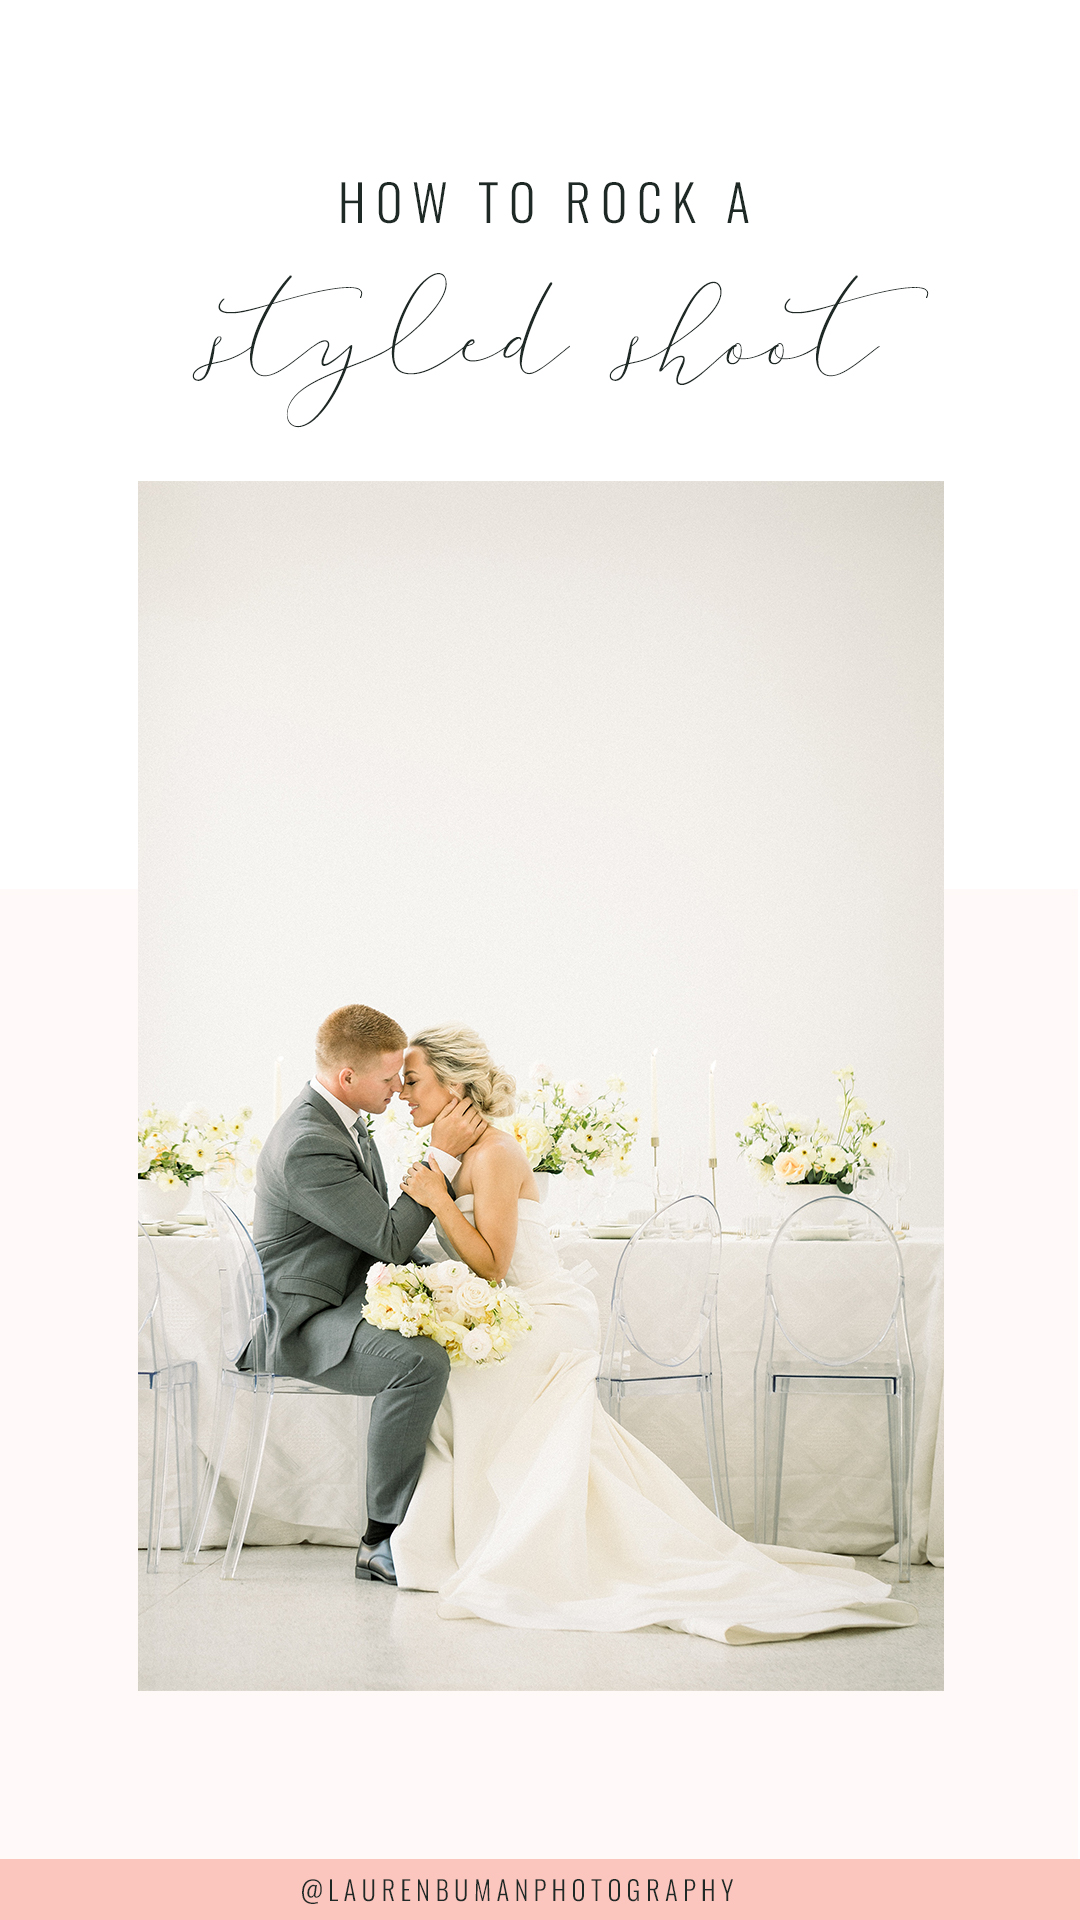 Styled Shoots for Photographers, How to Styled Shoots, How to rock a styled shoot